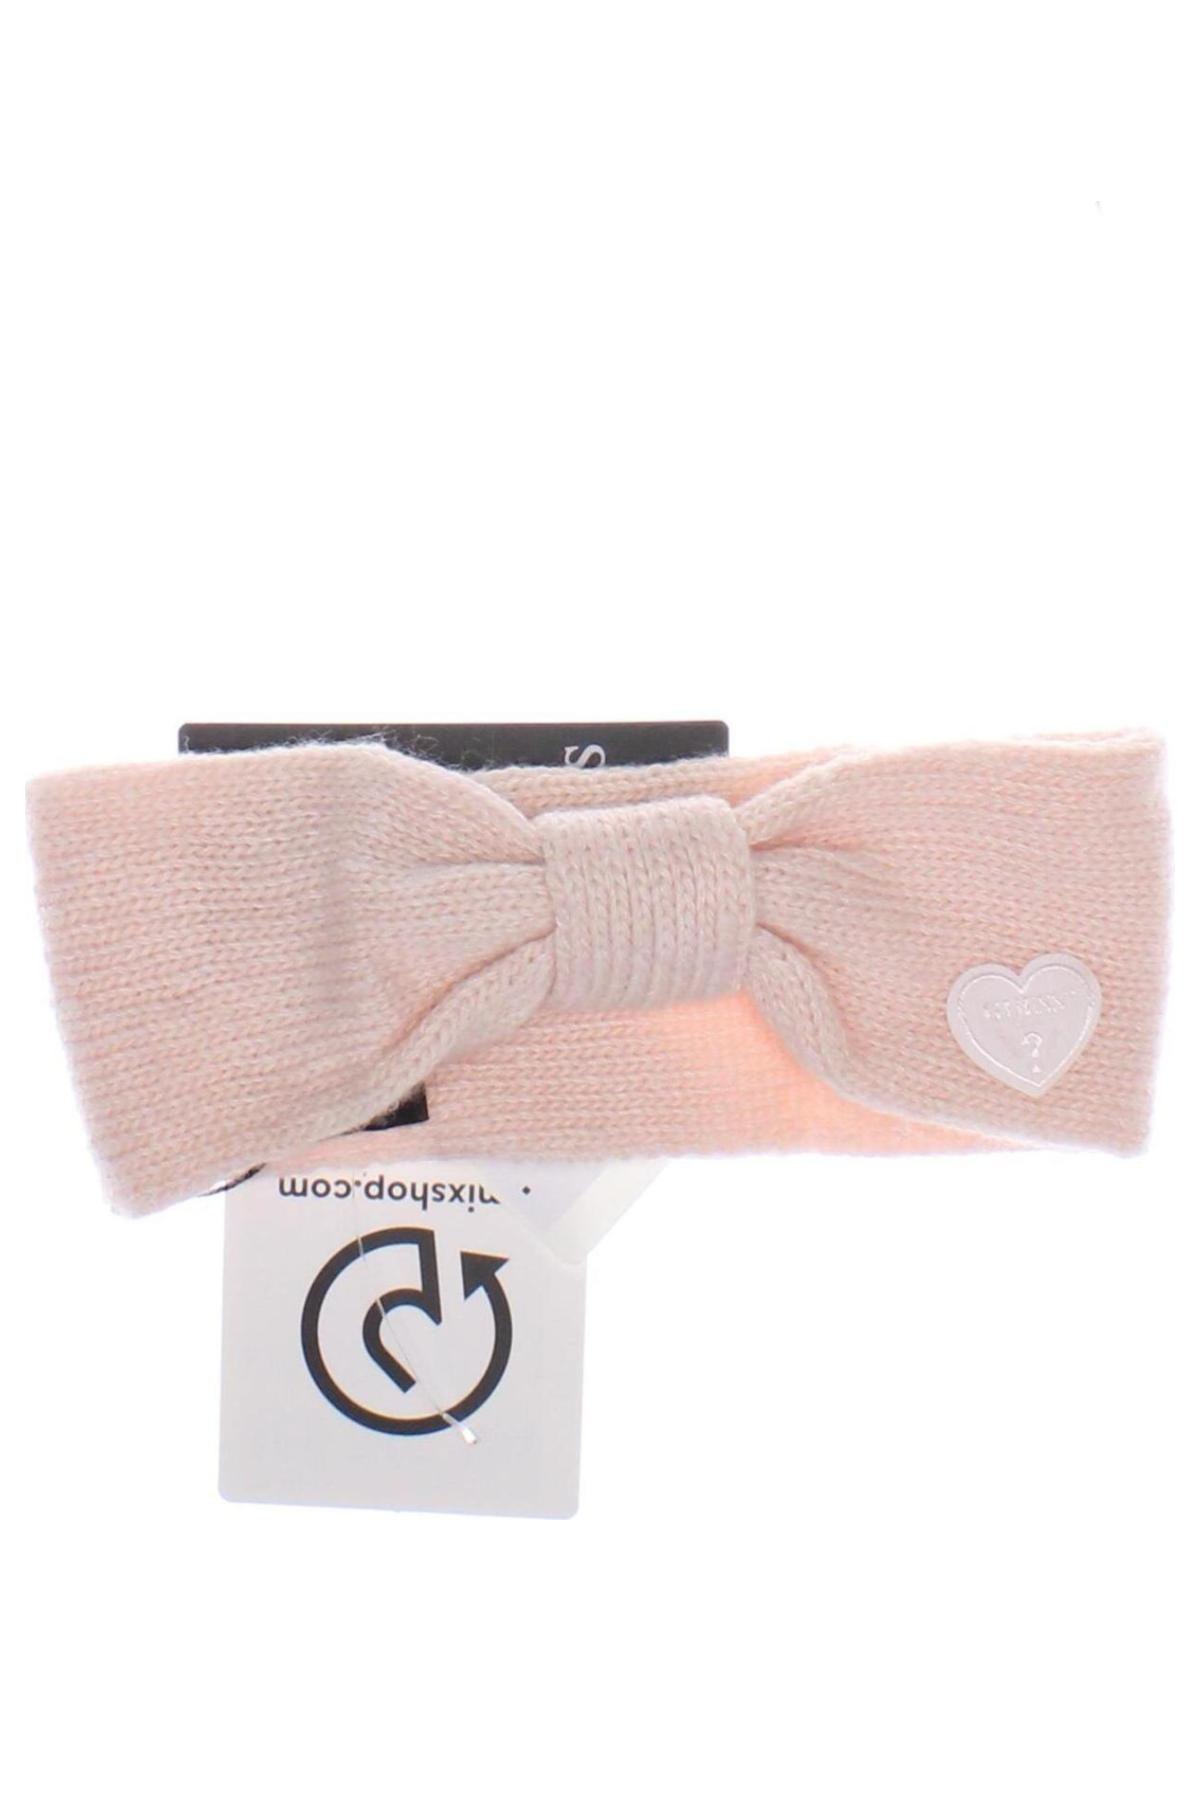 Stirnband Guess, Farbe Rosa, Preis 24,10 €